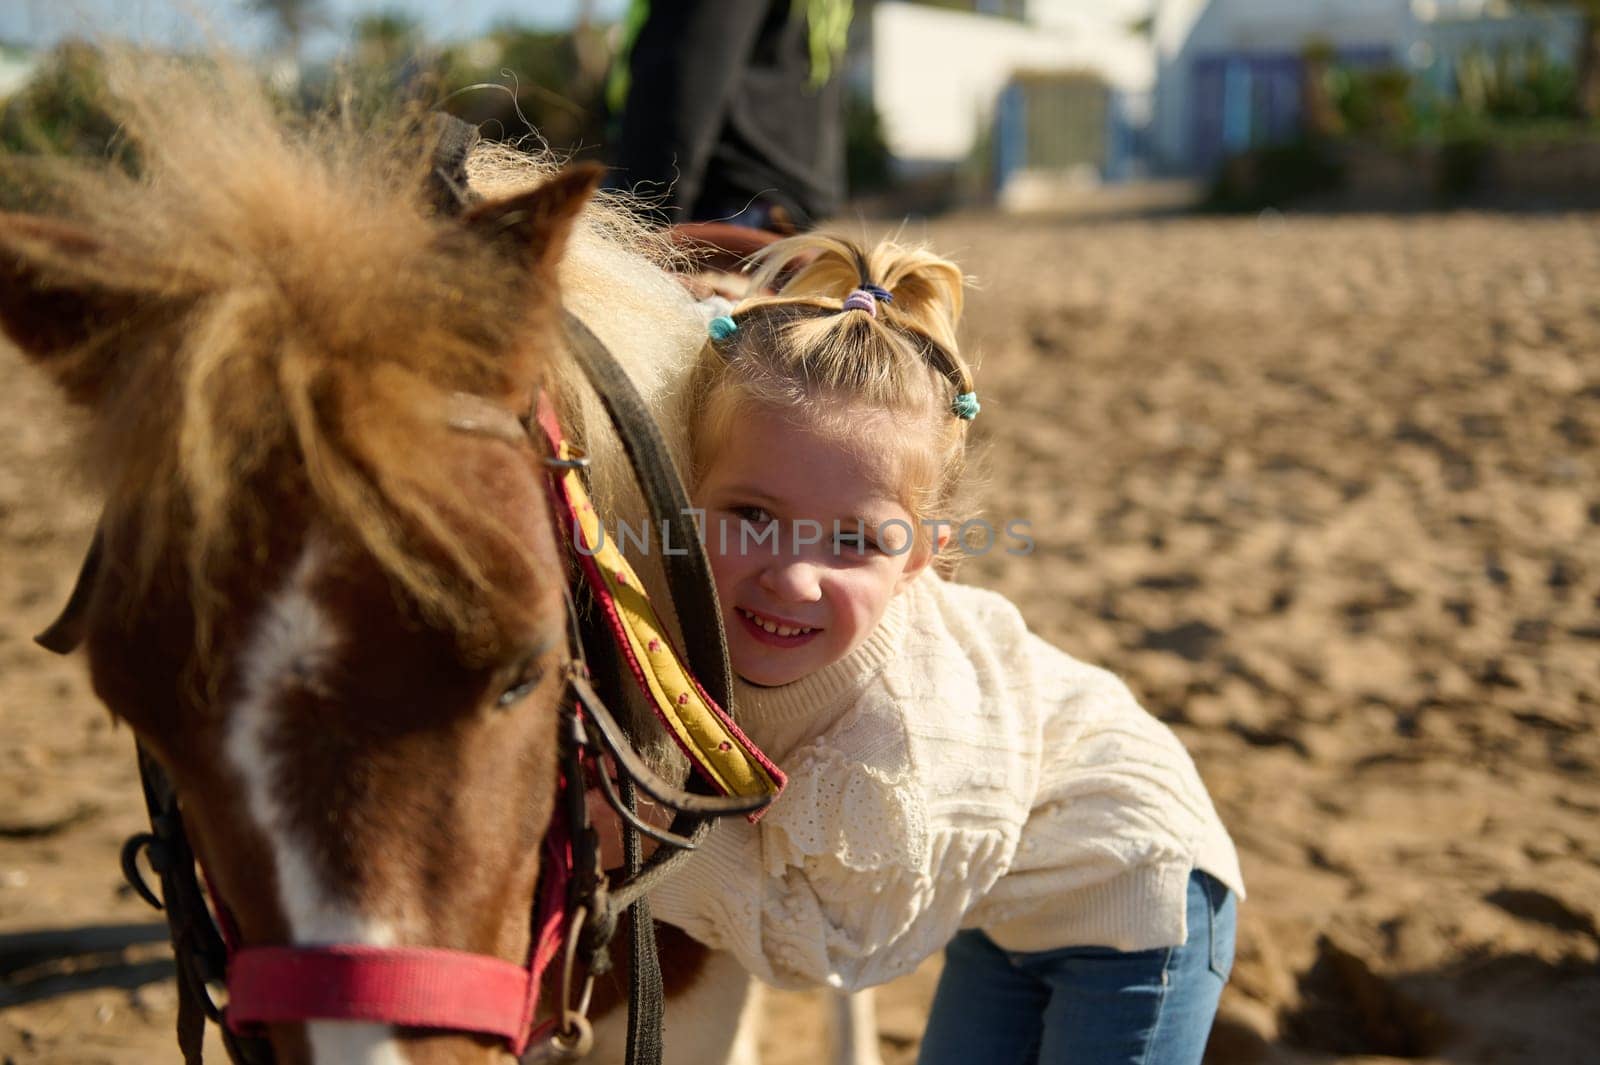 Adorable child girl gently hugging her pony horse, standing on the sandy beach. The concept of alternative horse therapy. Love, care and kindness for animals. Happy carefree childhood